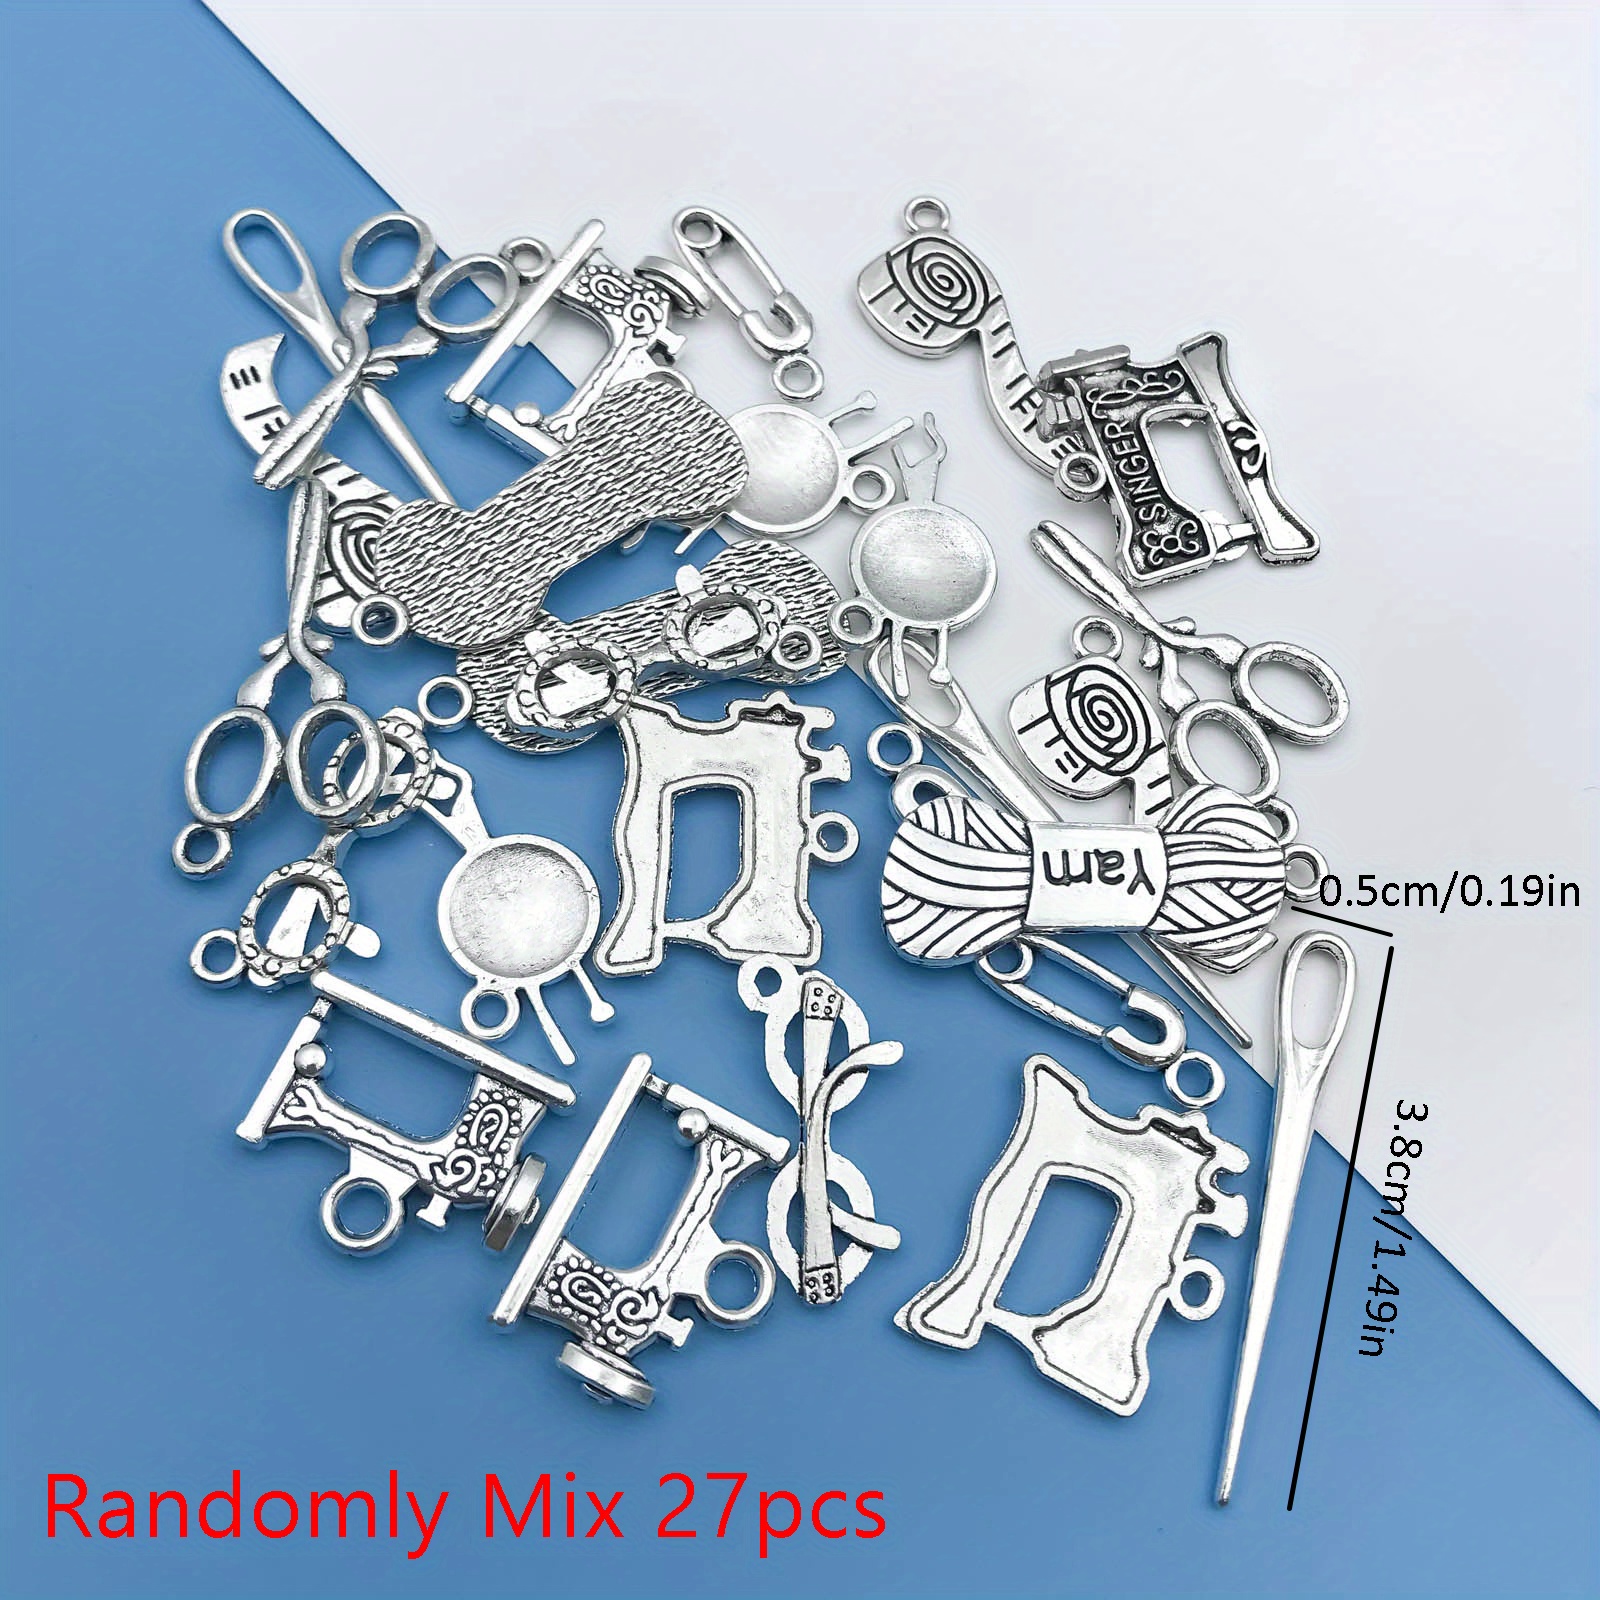 20pcs Vintage Metal 4color Mix Size Random 20-200 Style Charms Pendant for  Jewelry Making Diy Handmade Jewelry